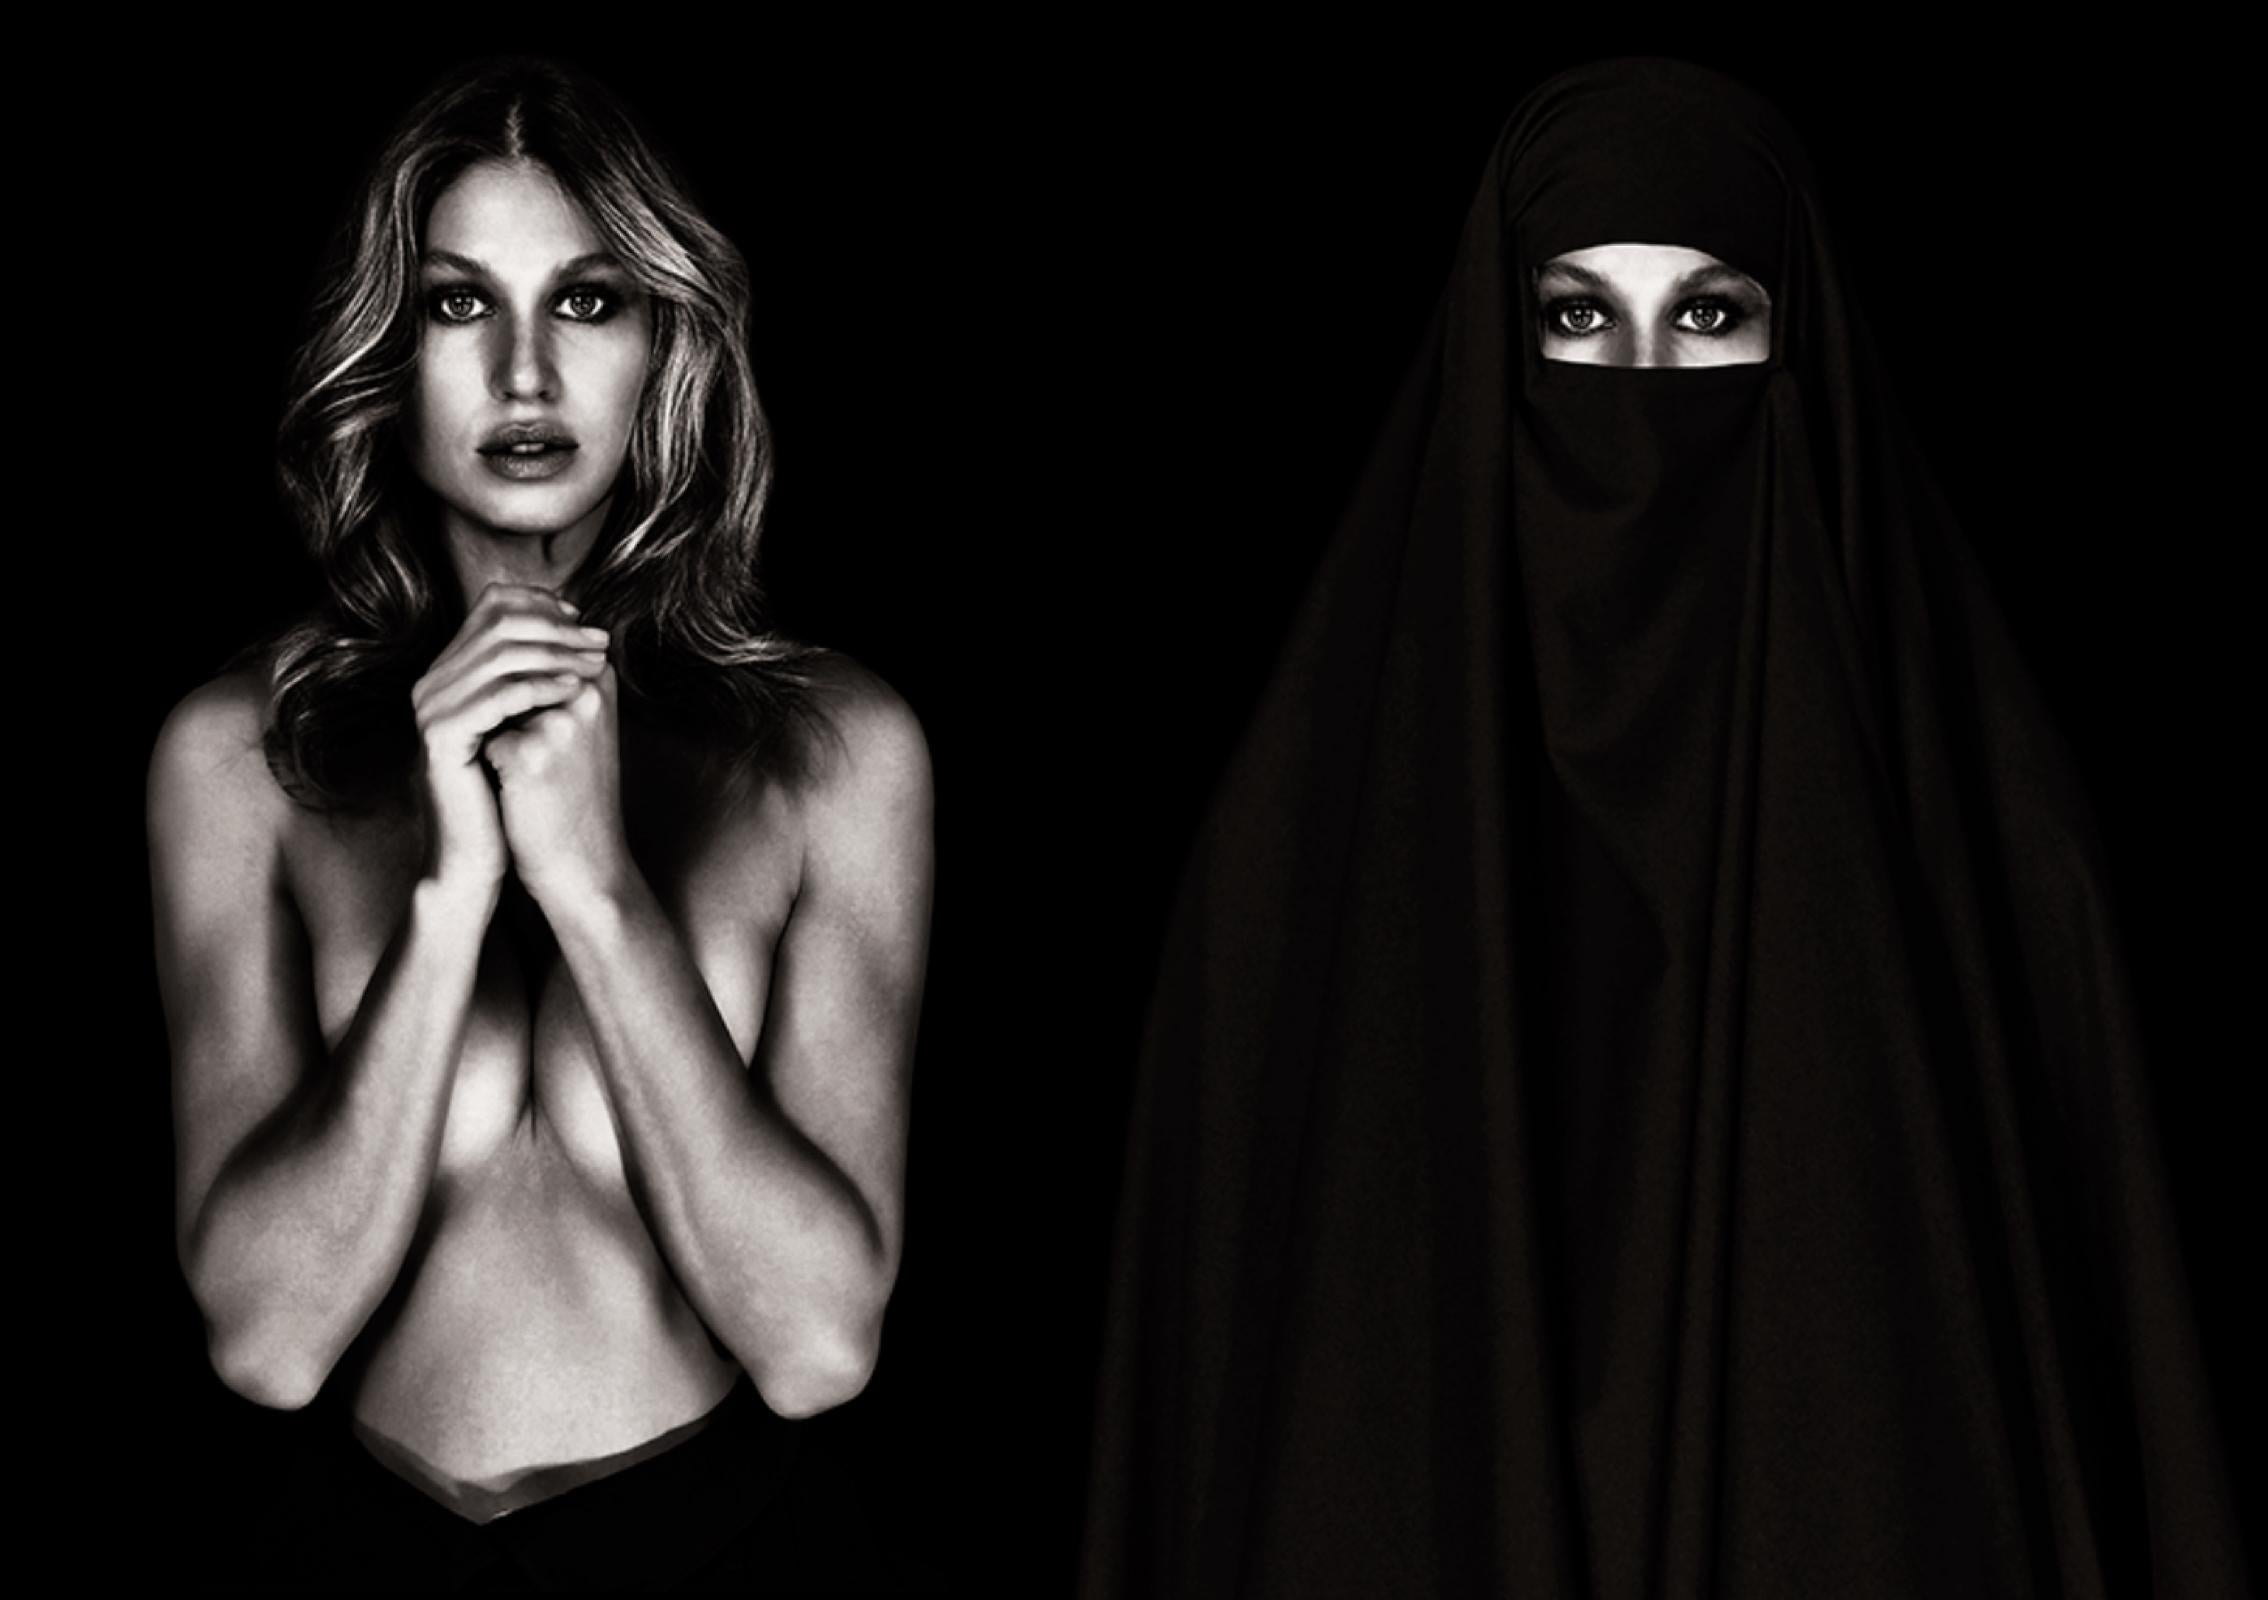 "Olga in burqa", photography by Cécile Plaisance (27x22'), 2020